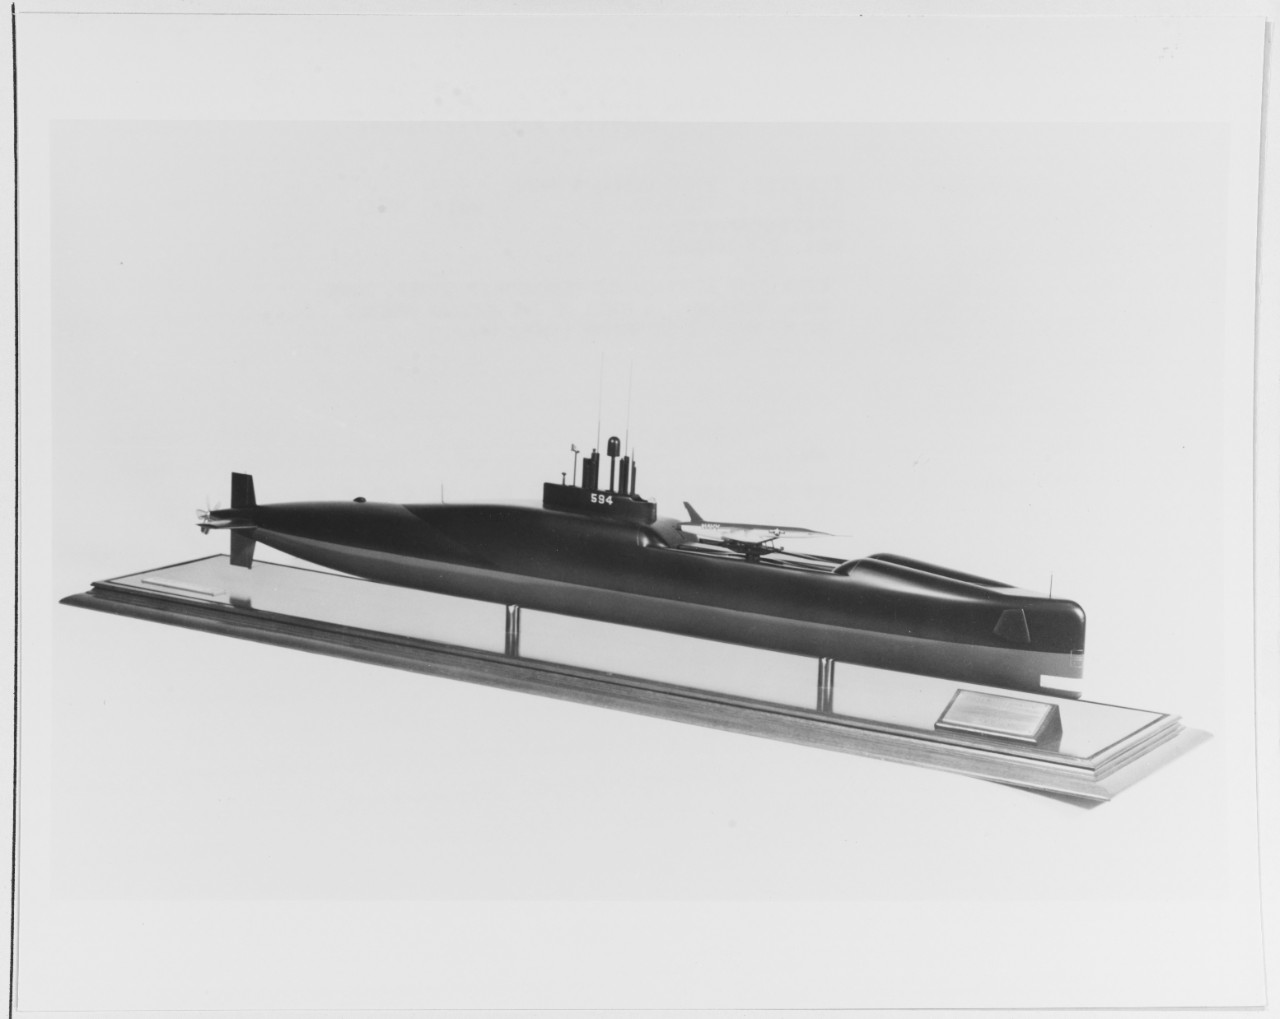 Nuclear-Powered Guided Missile Submarine (SSGN) 594